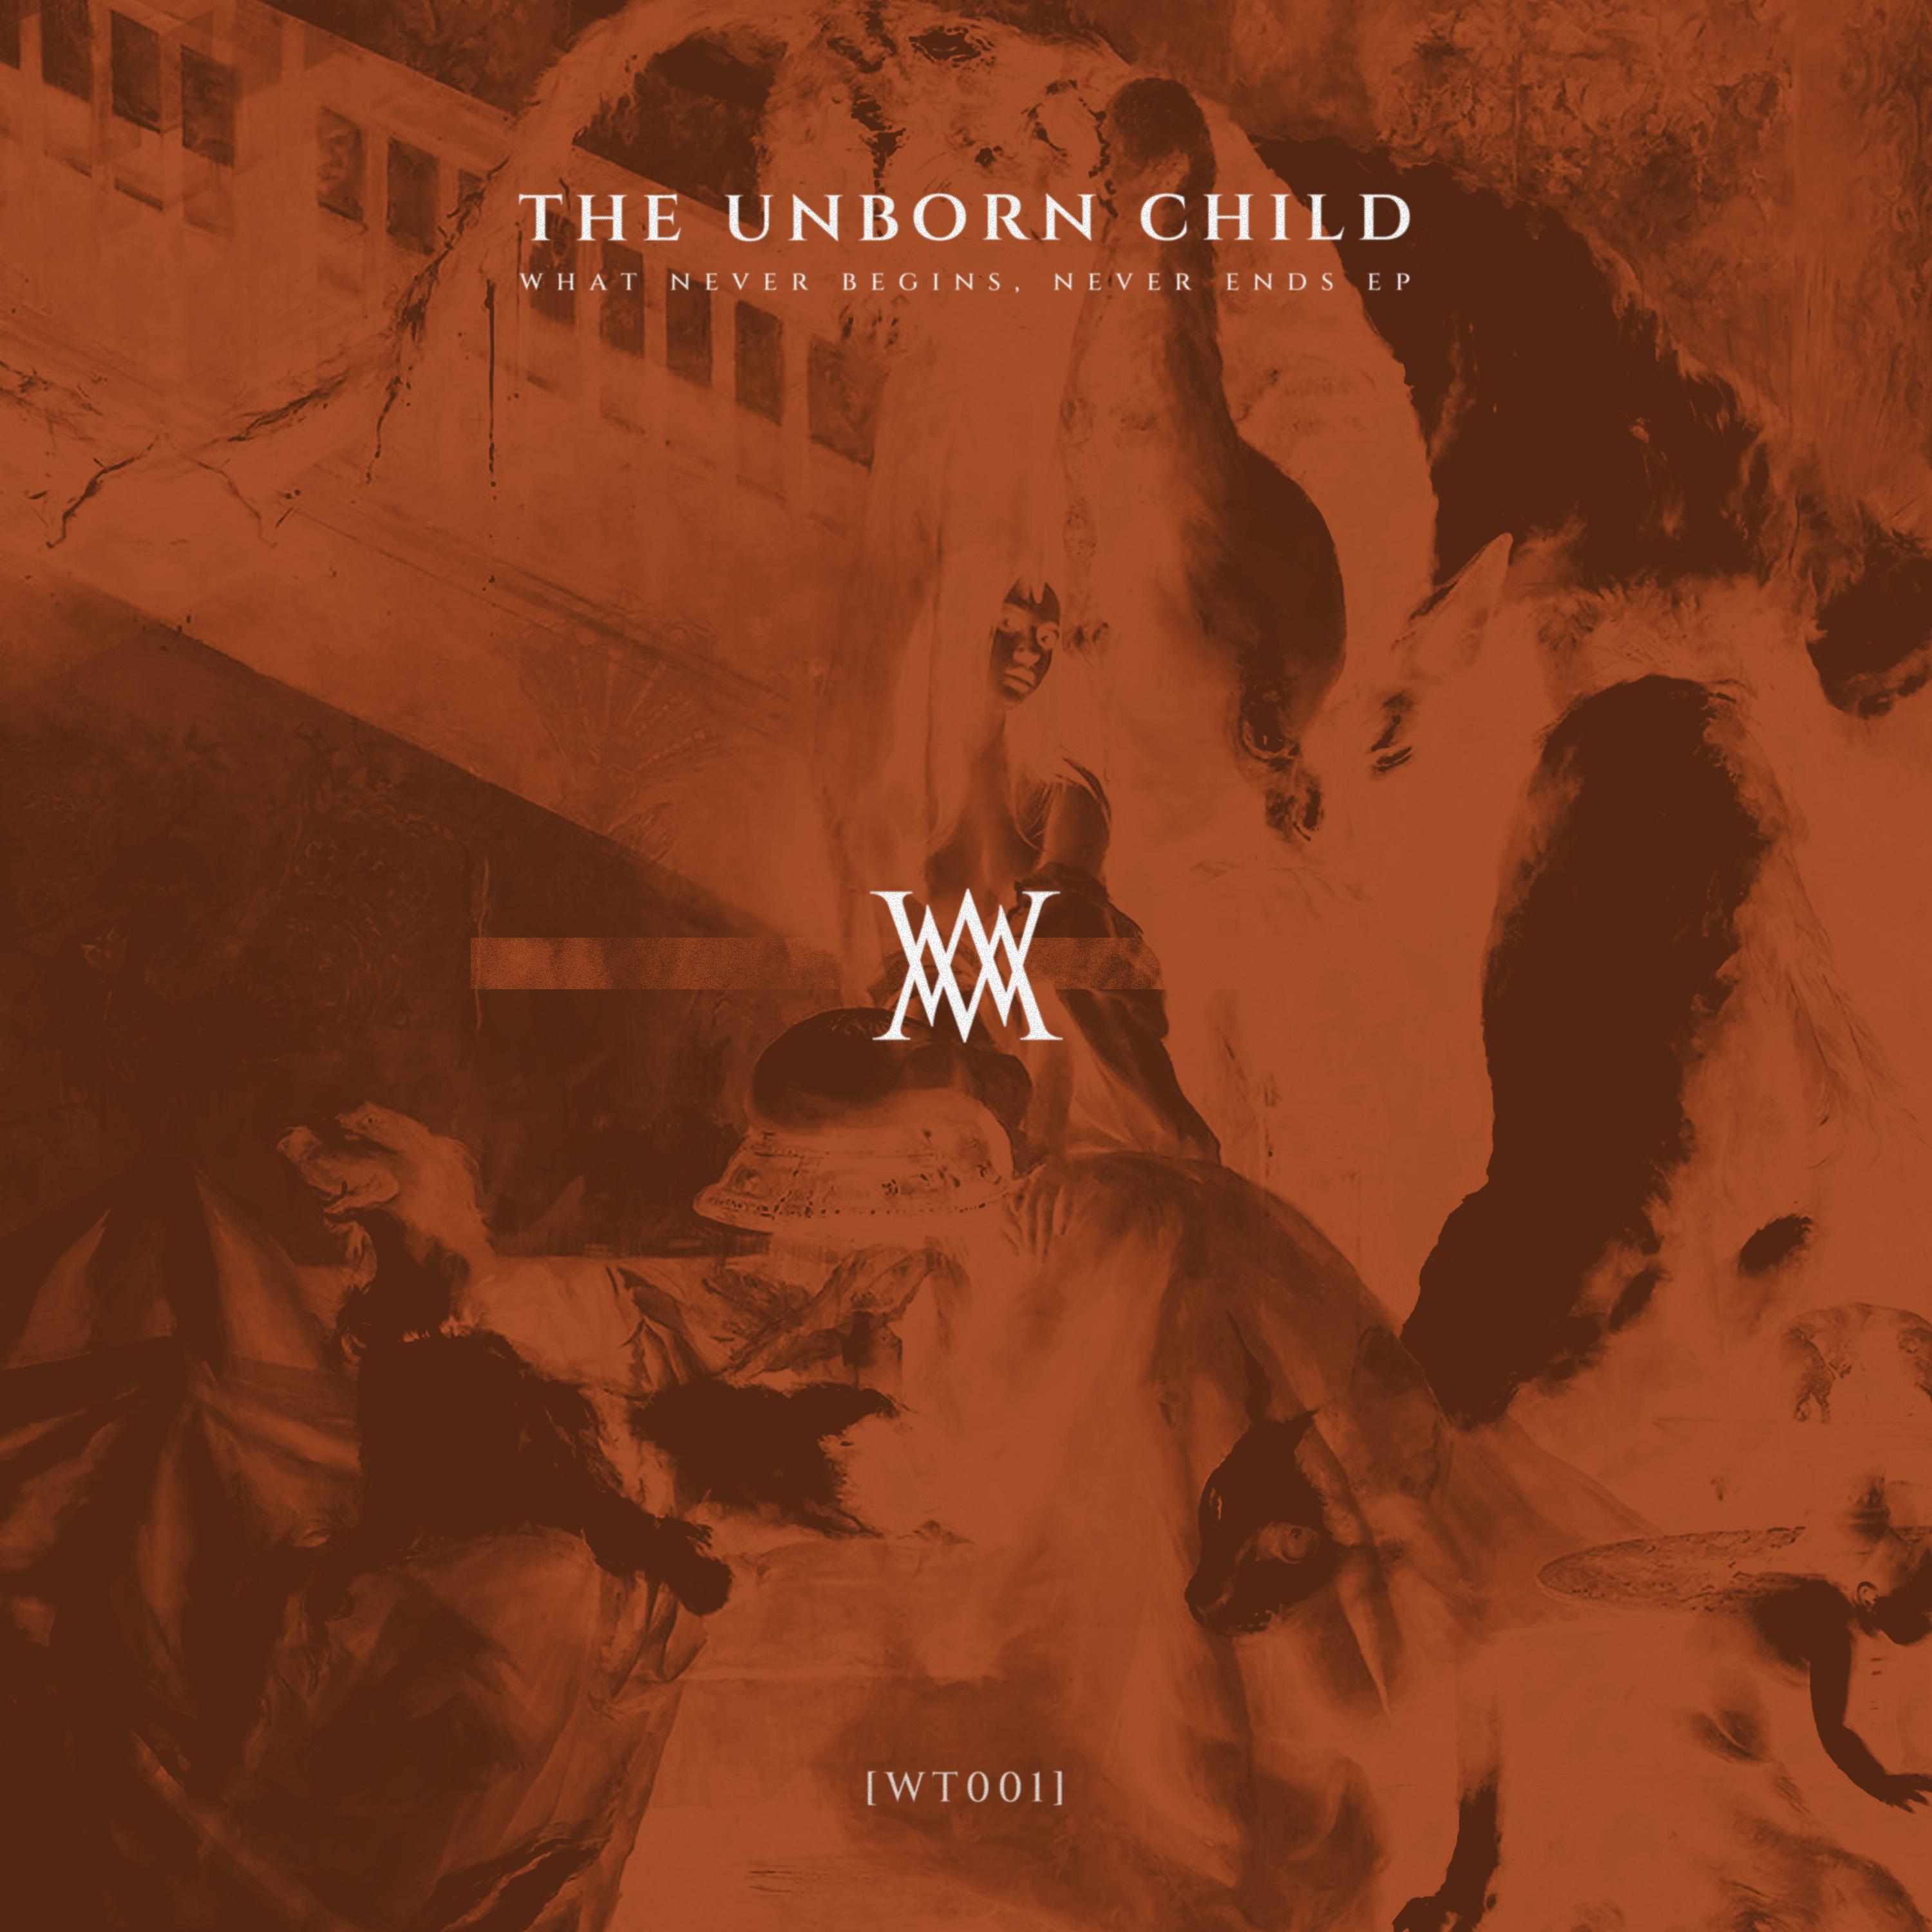 The Unborn Child - Asking For Help